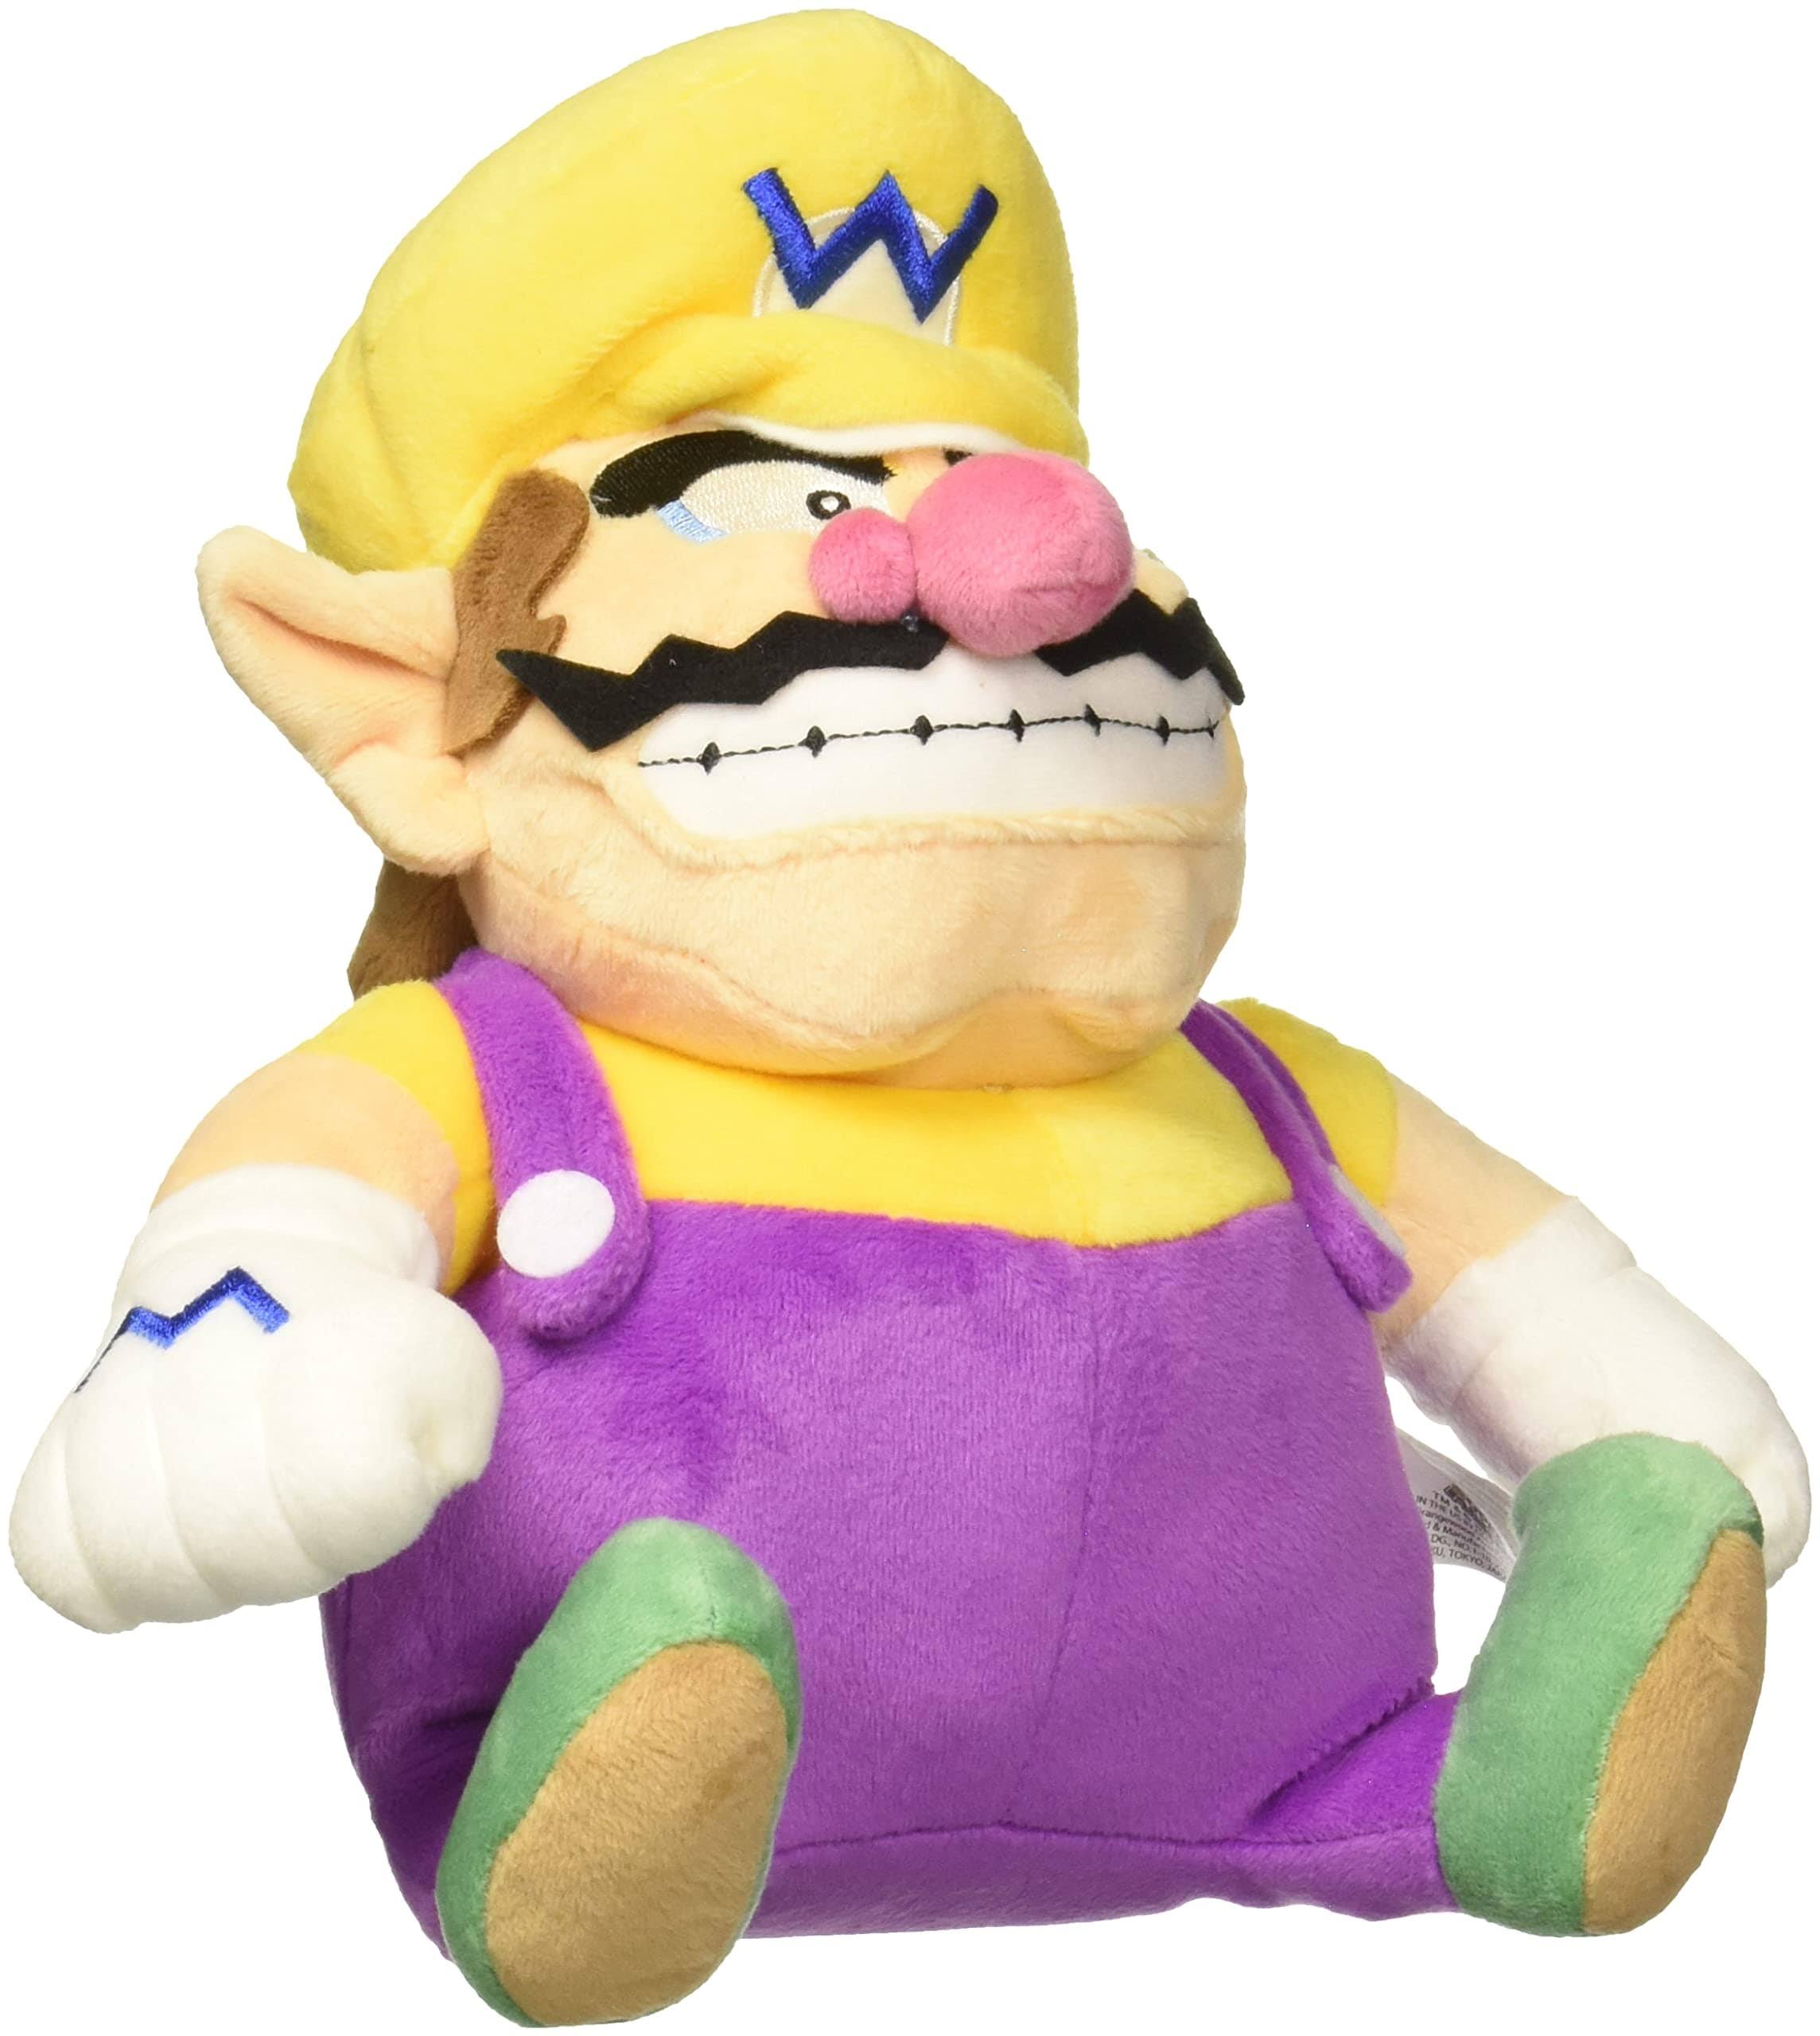 Little Buddy Super Mario All Star Collection Wario Stuffed Plush Toy - 10"